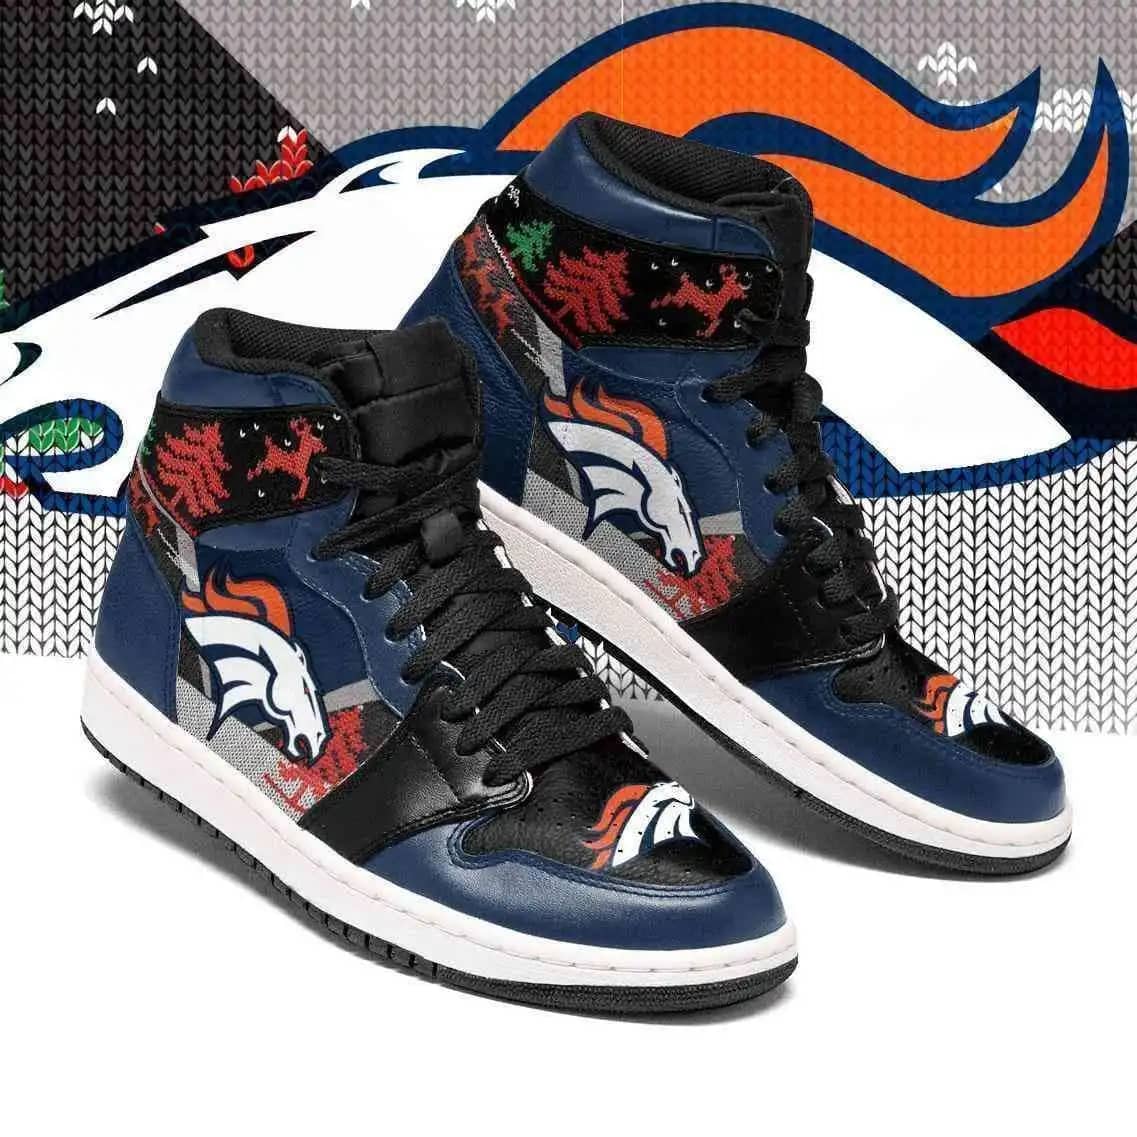 Christmas Denver Broncos Nfl Sneakers Perfect Gift For Sports Fans Air Jordan Shoes